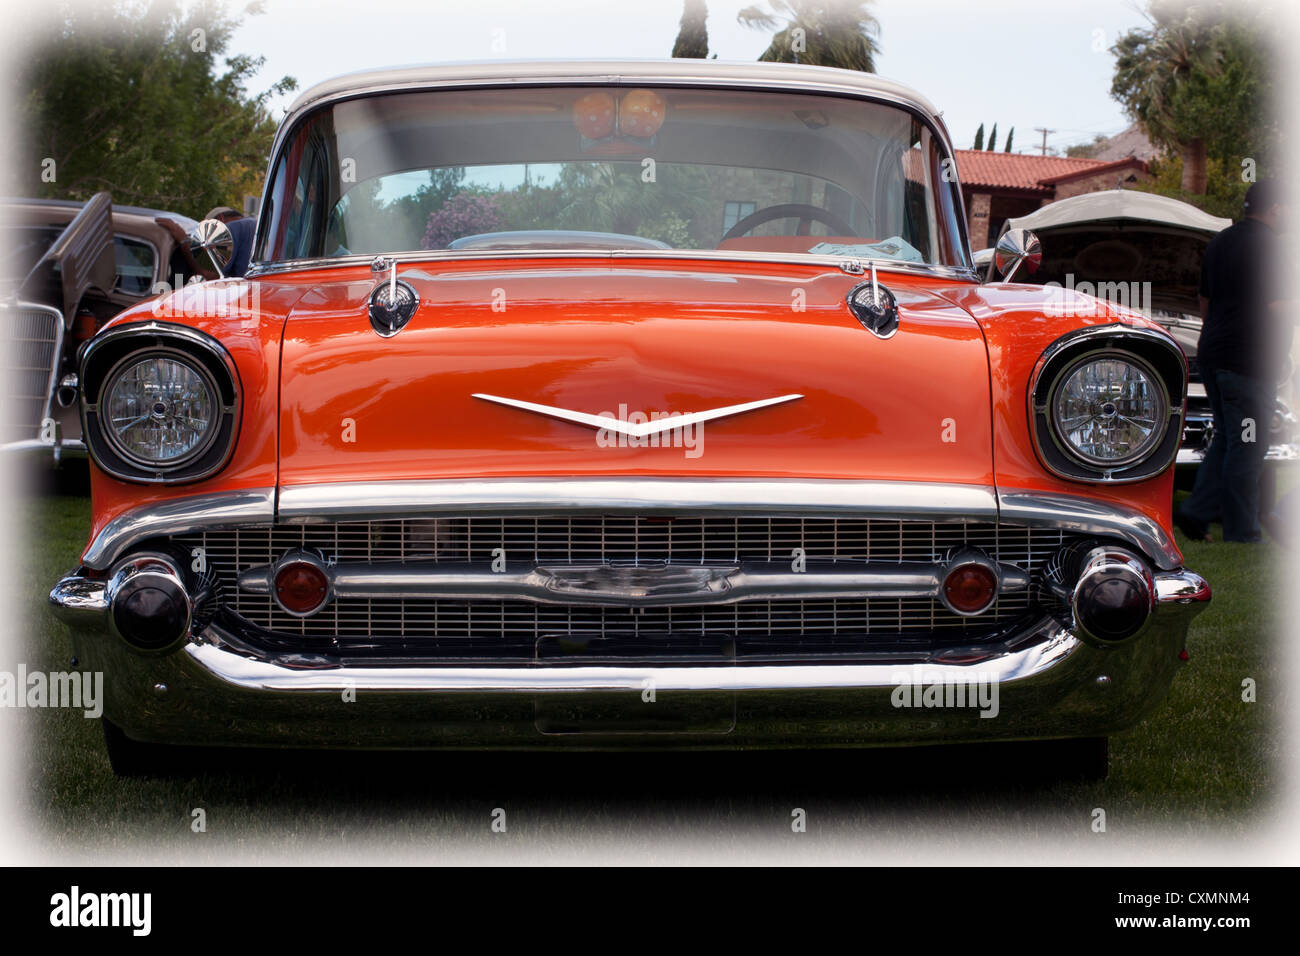 57 Chevy Bel air Stock Photo